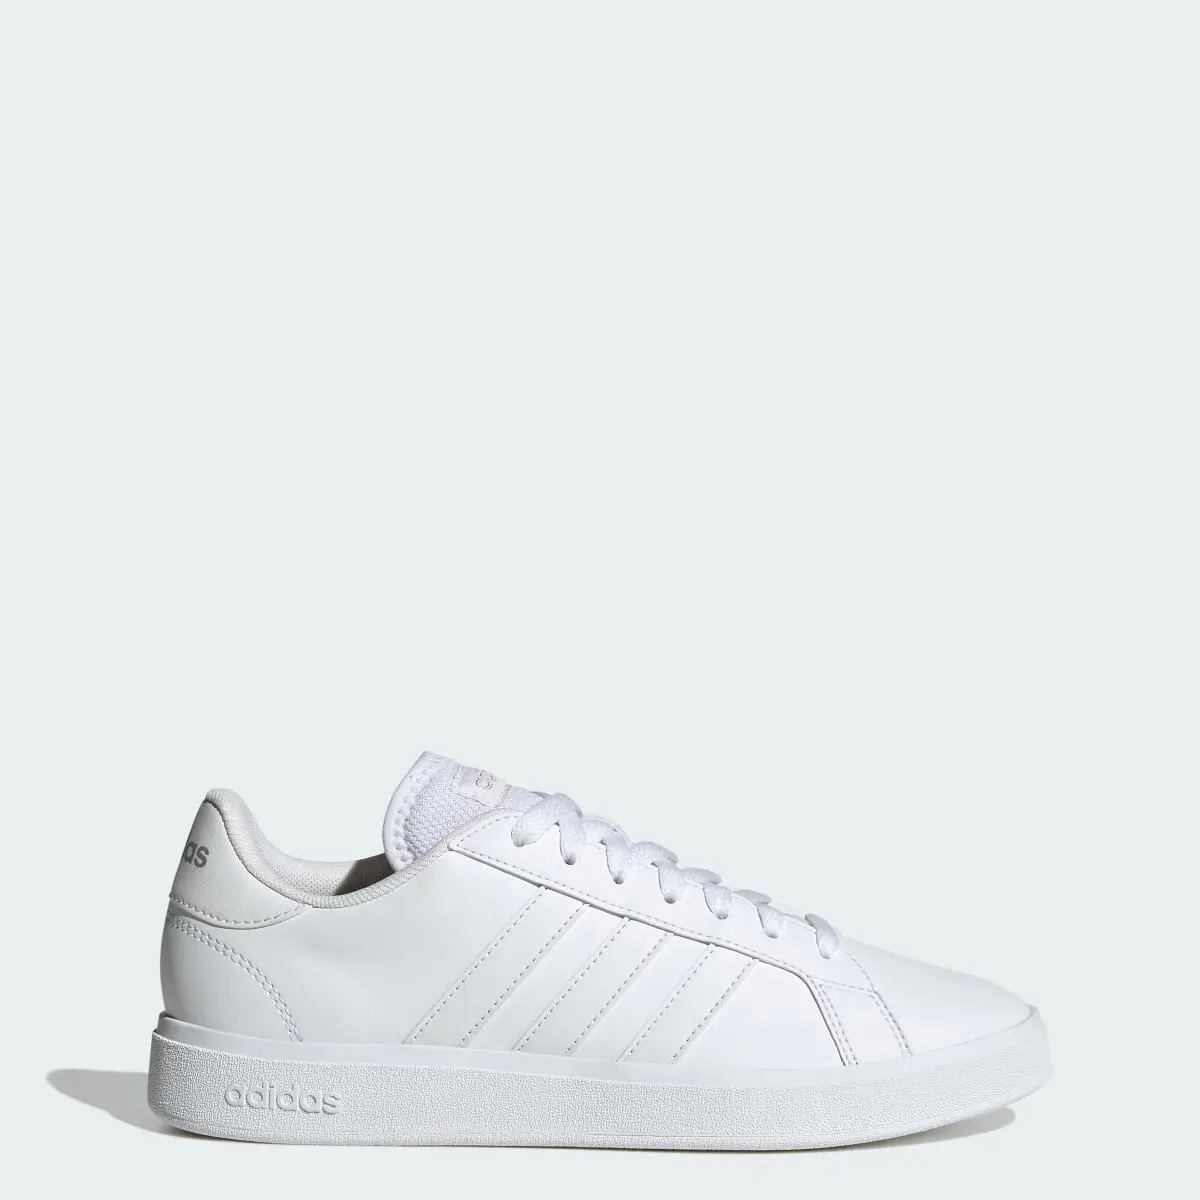 Adidas Grand Court TD Lifestyle Court Casual Shoes. 1